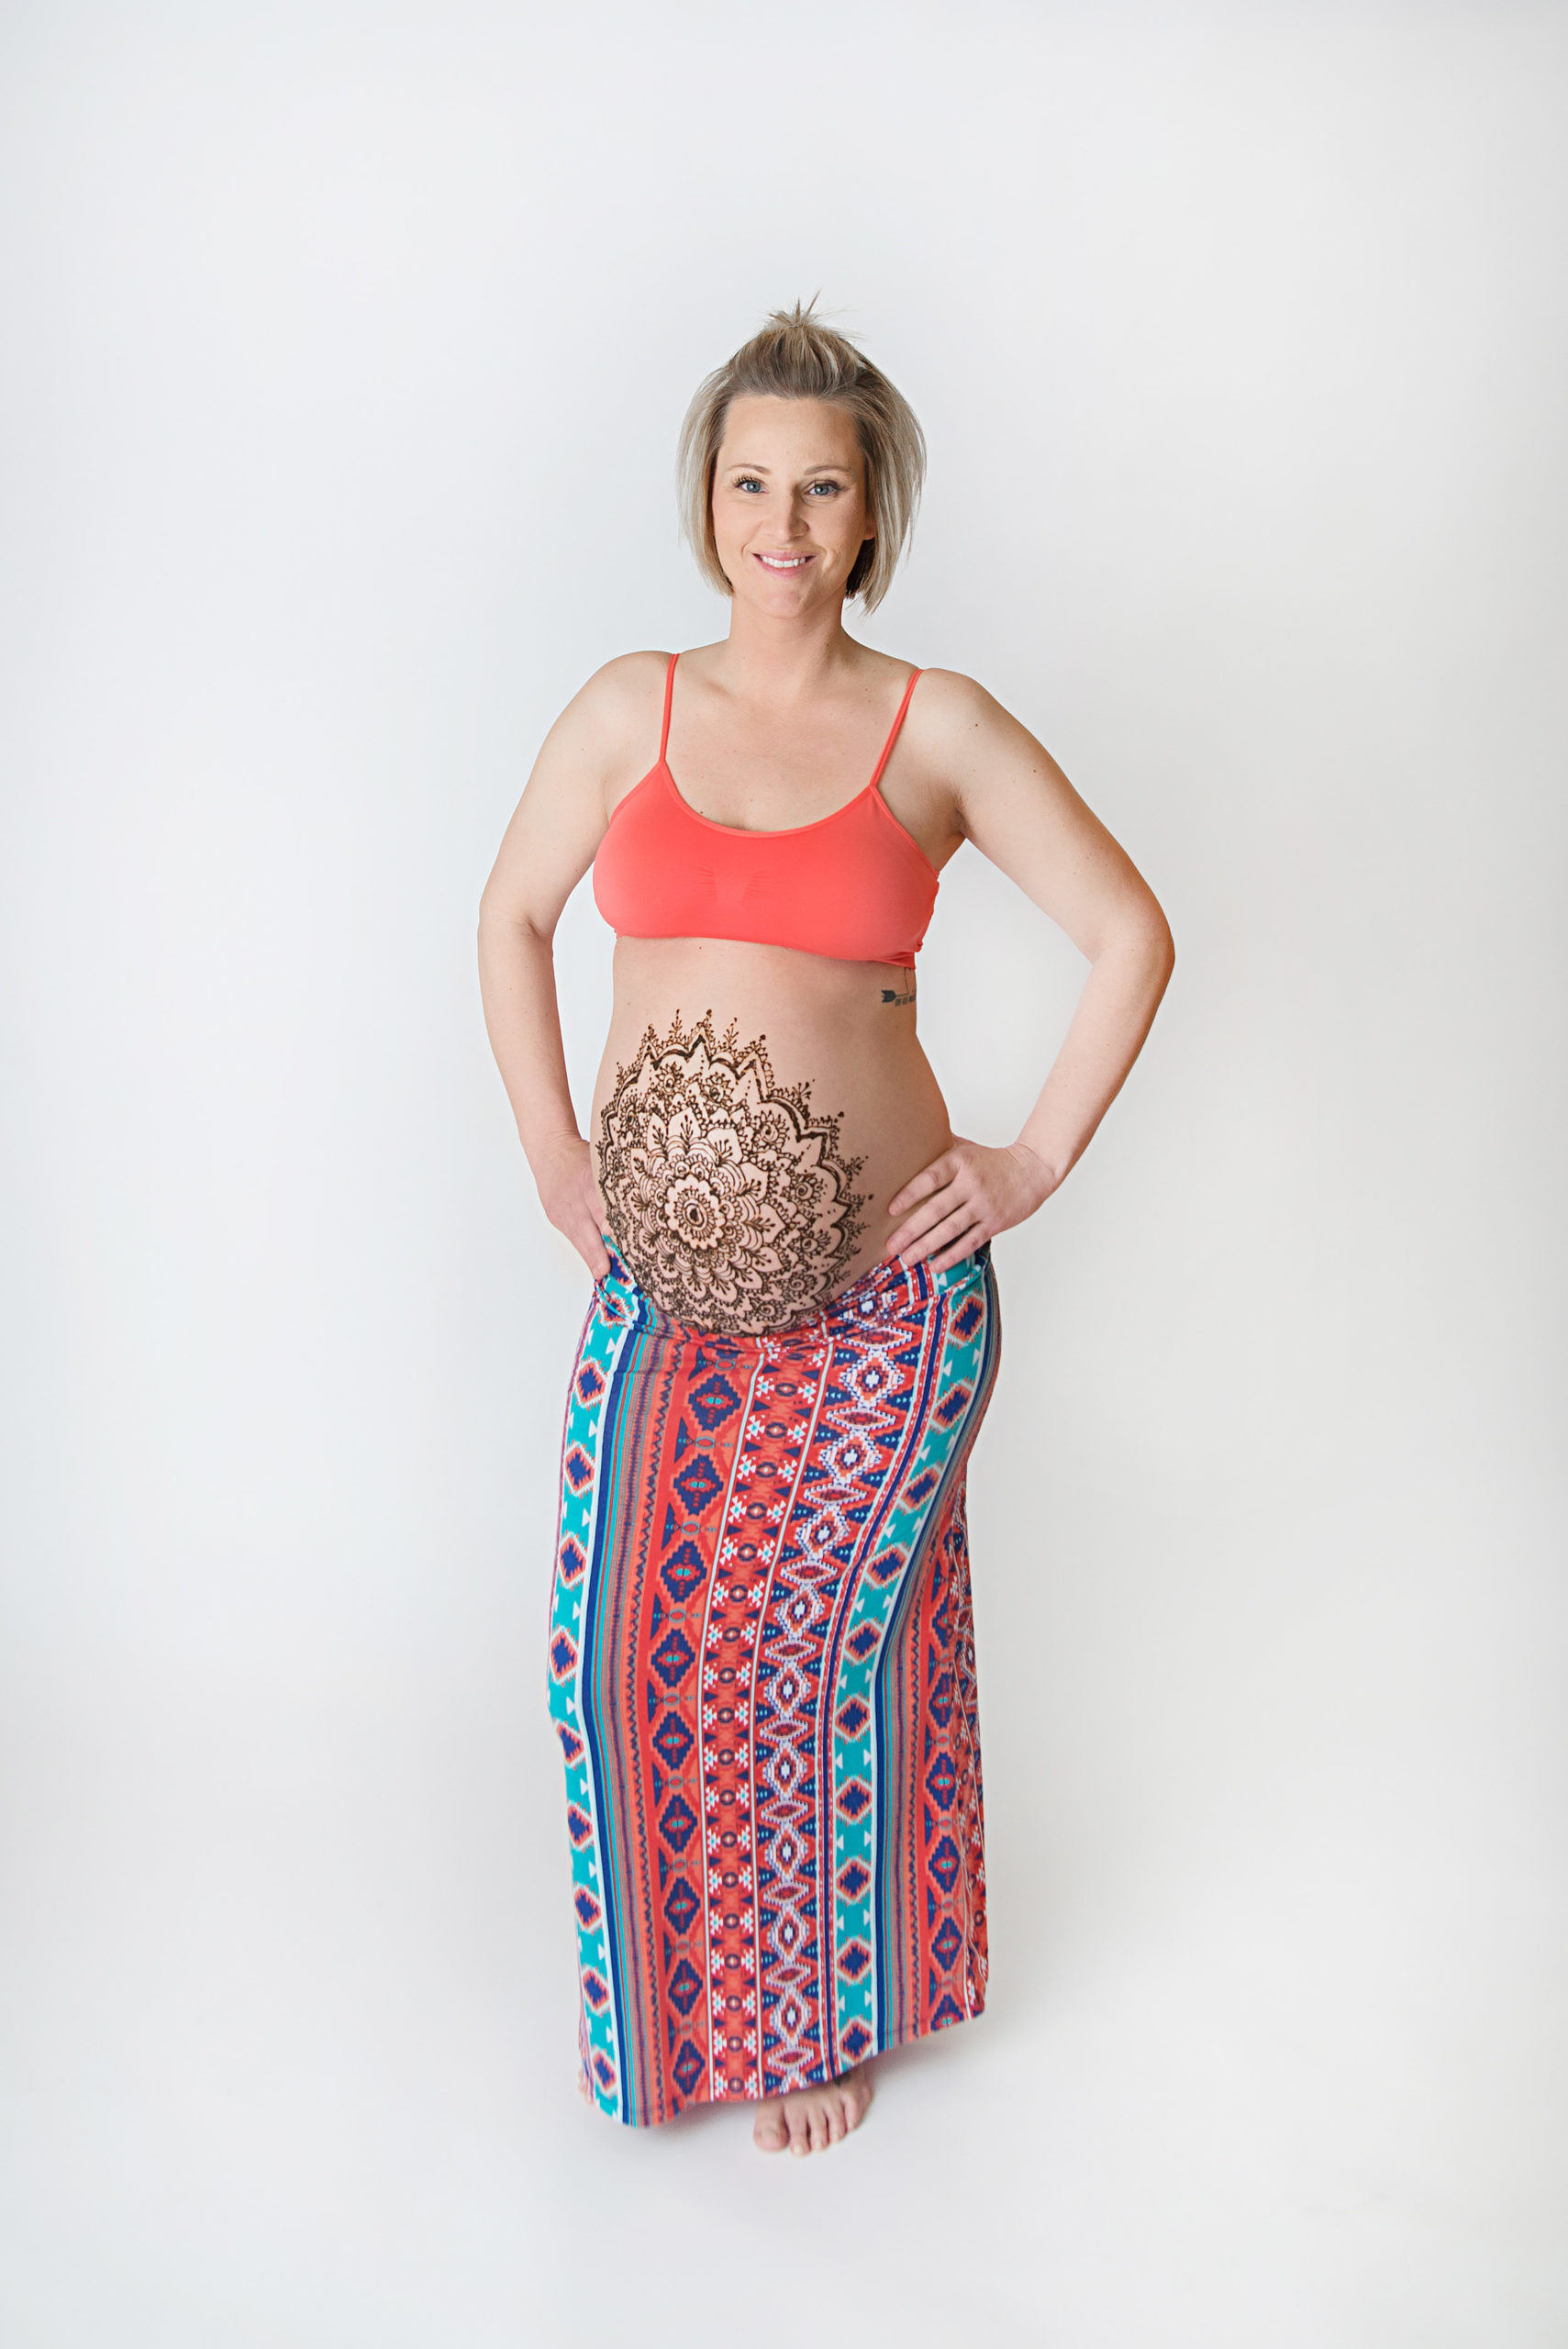 st-louis-maternity-henna-photography-pregnant-mom-in-bright-color-skirt-and-top-with-mandala-henna-bellay.jpg